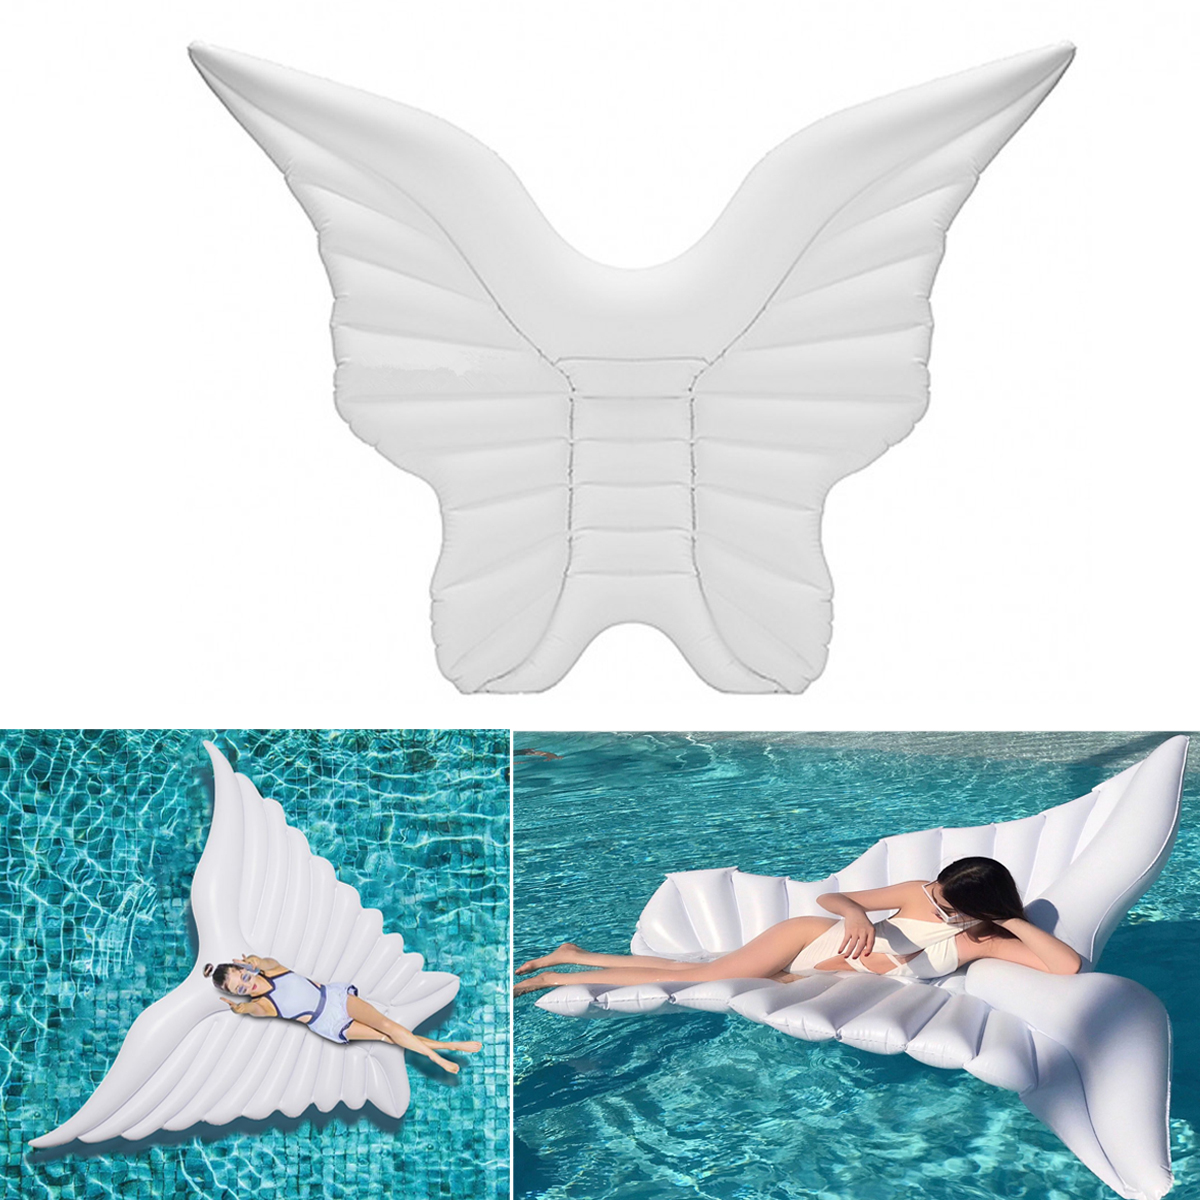 

Giant Inflatable Angel Wings Water Float Raft Swimming Pool Beach Lounger Toy